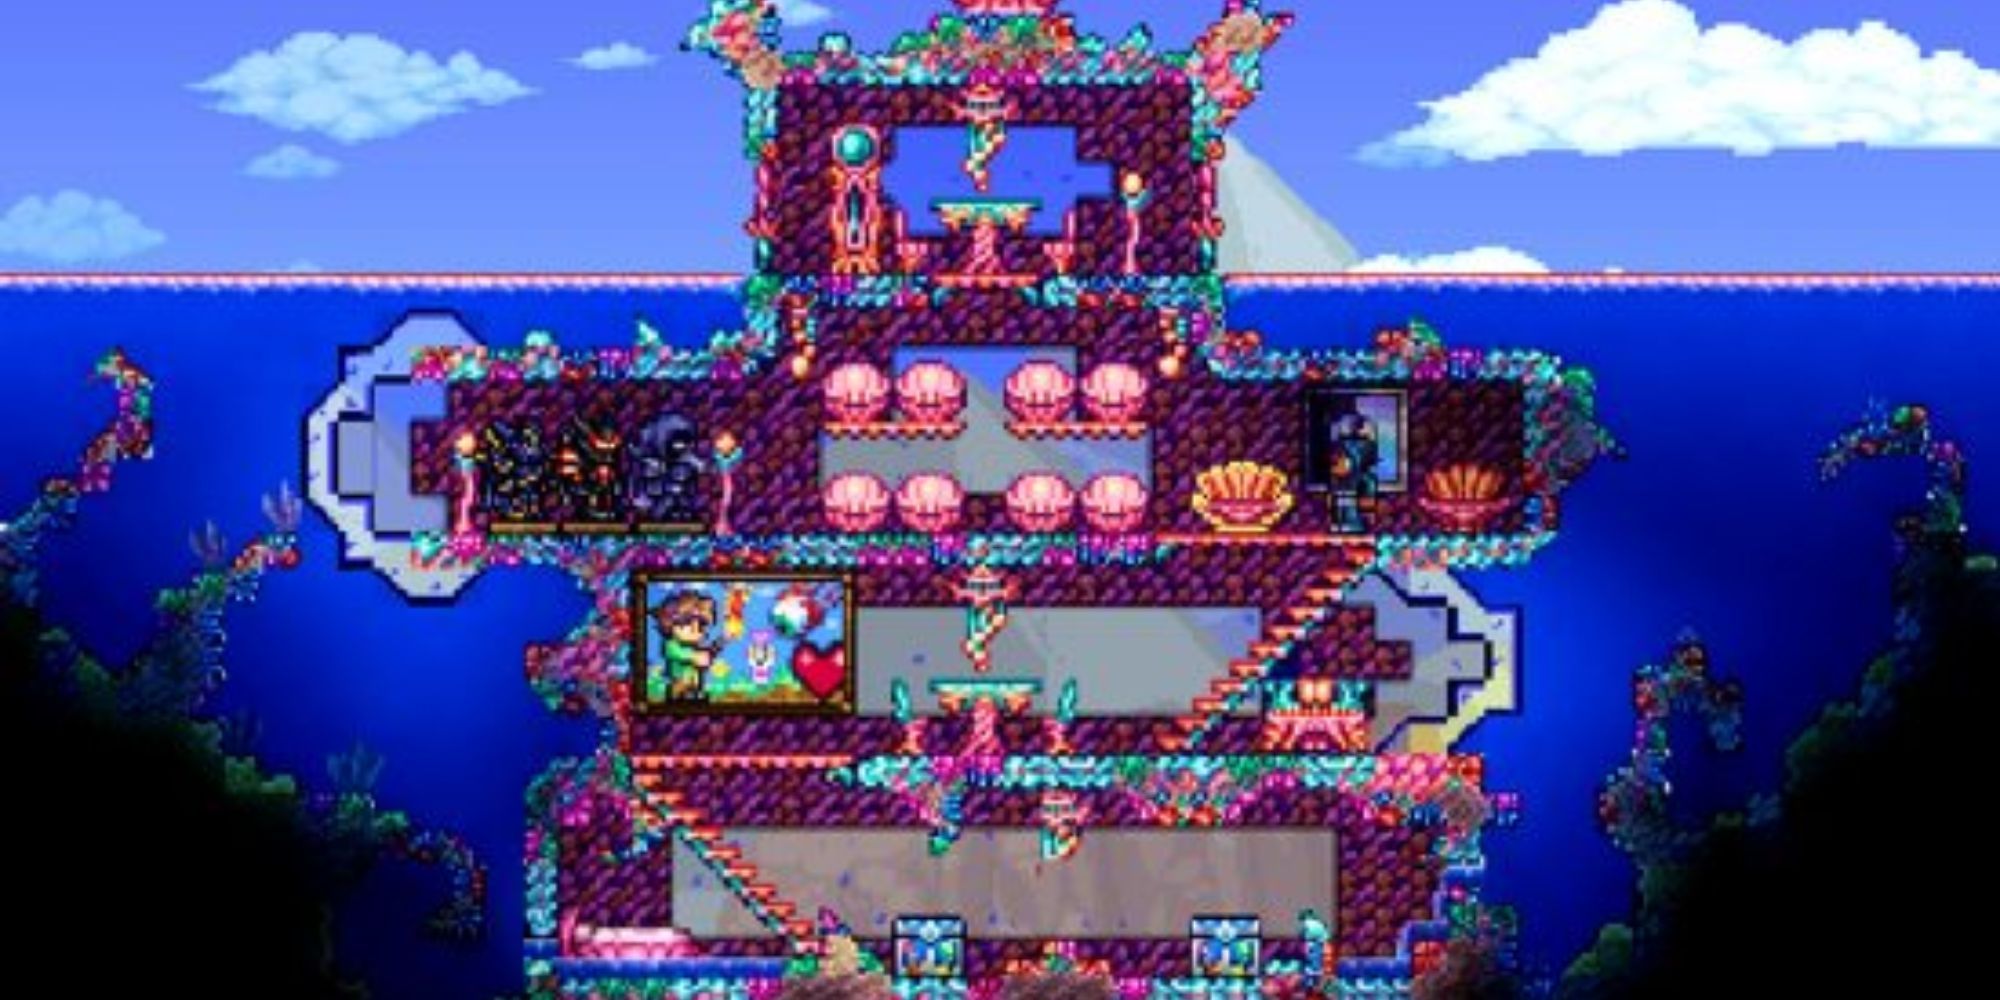 Terraria Studio Founder Wants To Bring Crossplay To The Game